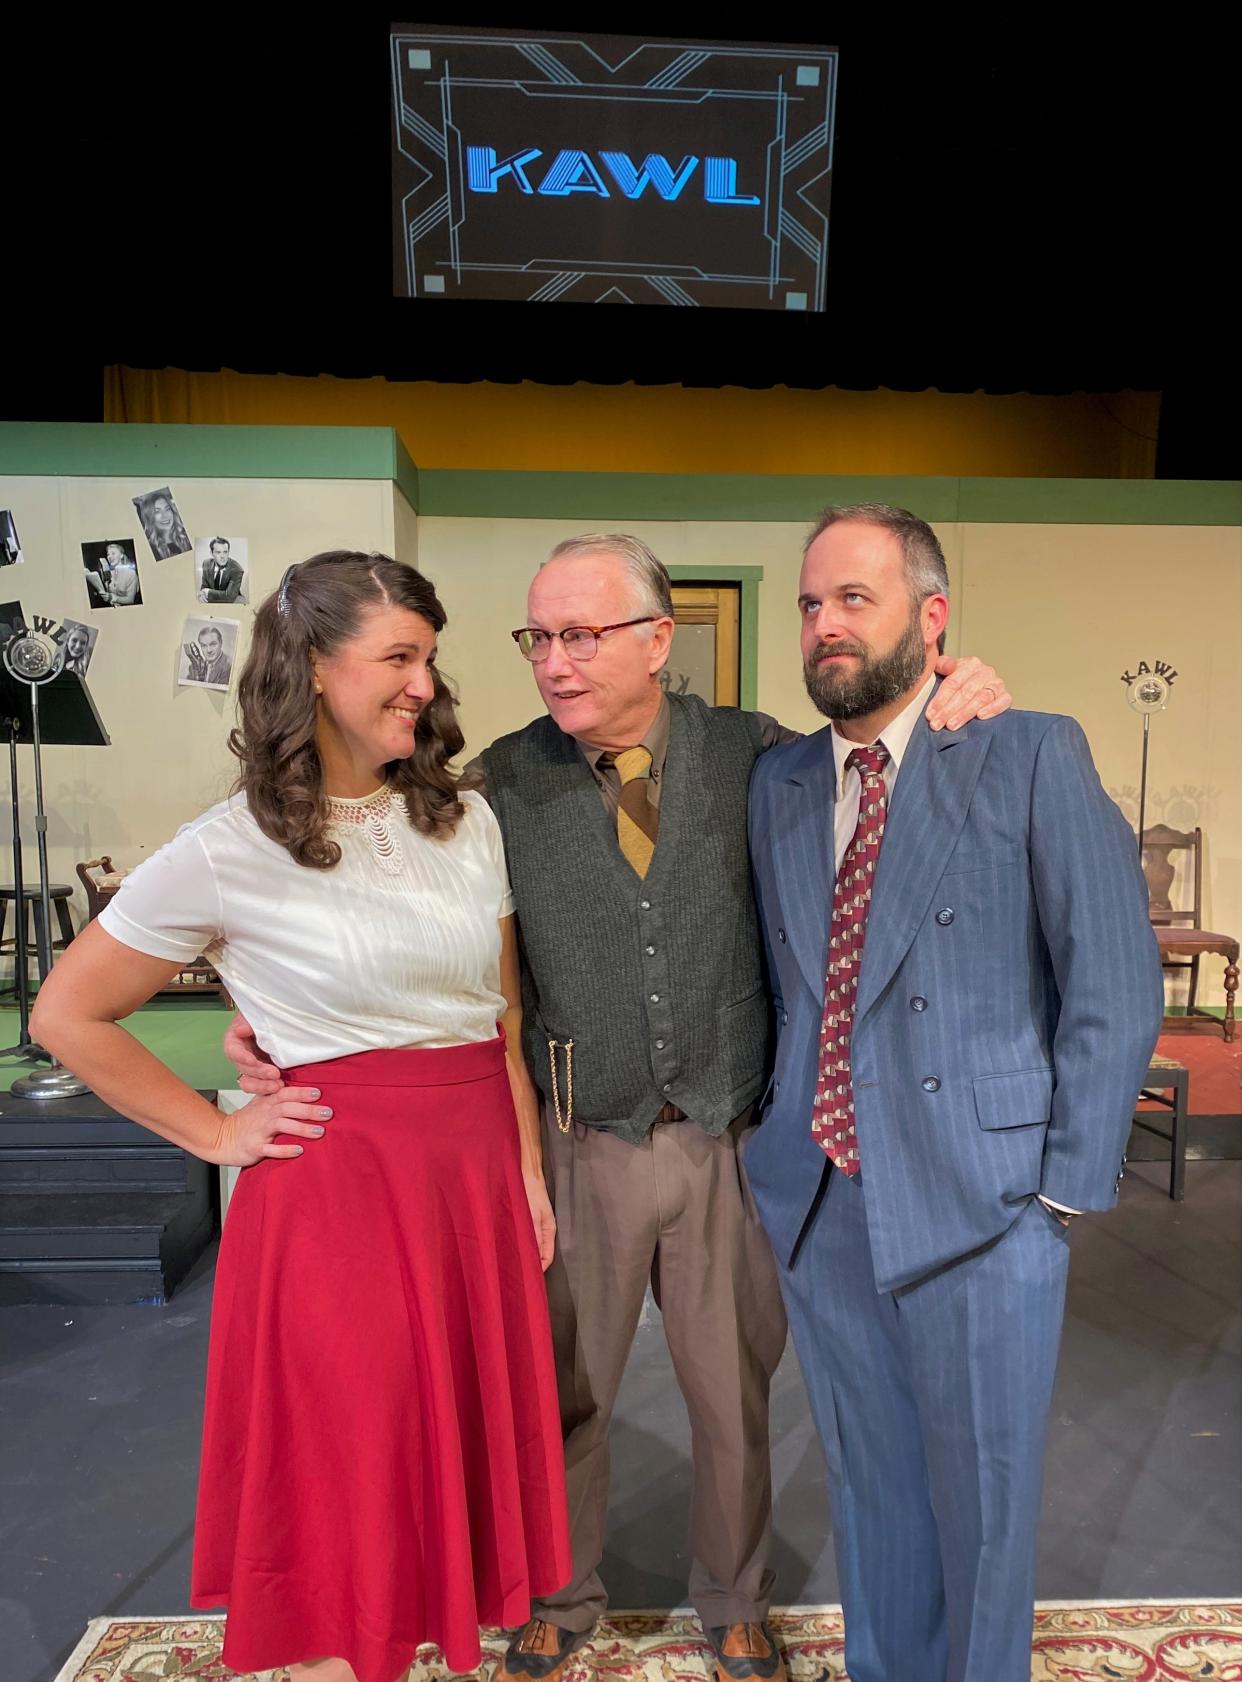 "It's good to be back," says radio actor Royce Thompson, center, as radio station operators Faith Buss and Jeff Foresee humor him in SLT's "It's A Wonderful Life: A KAWL Radio Play".